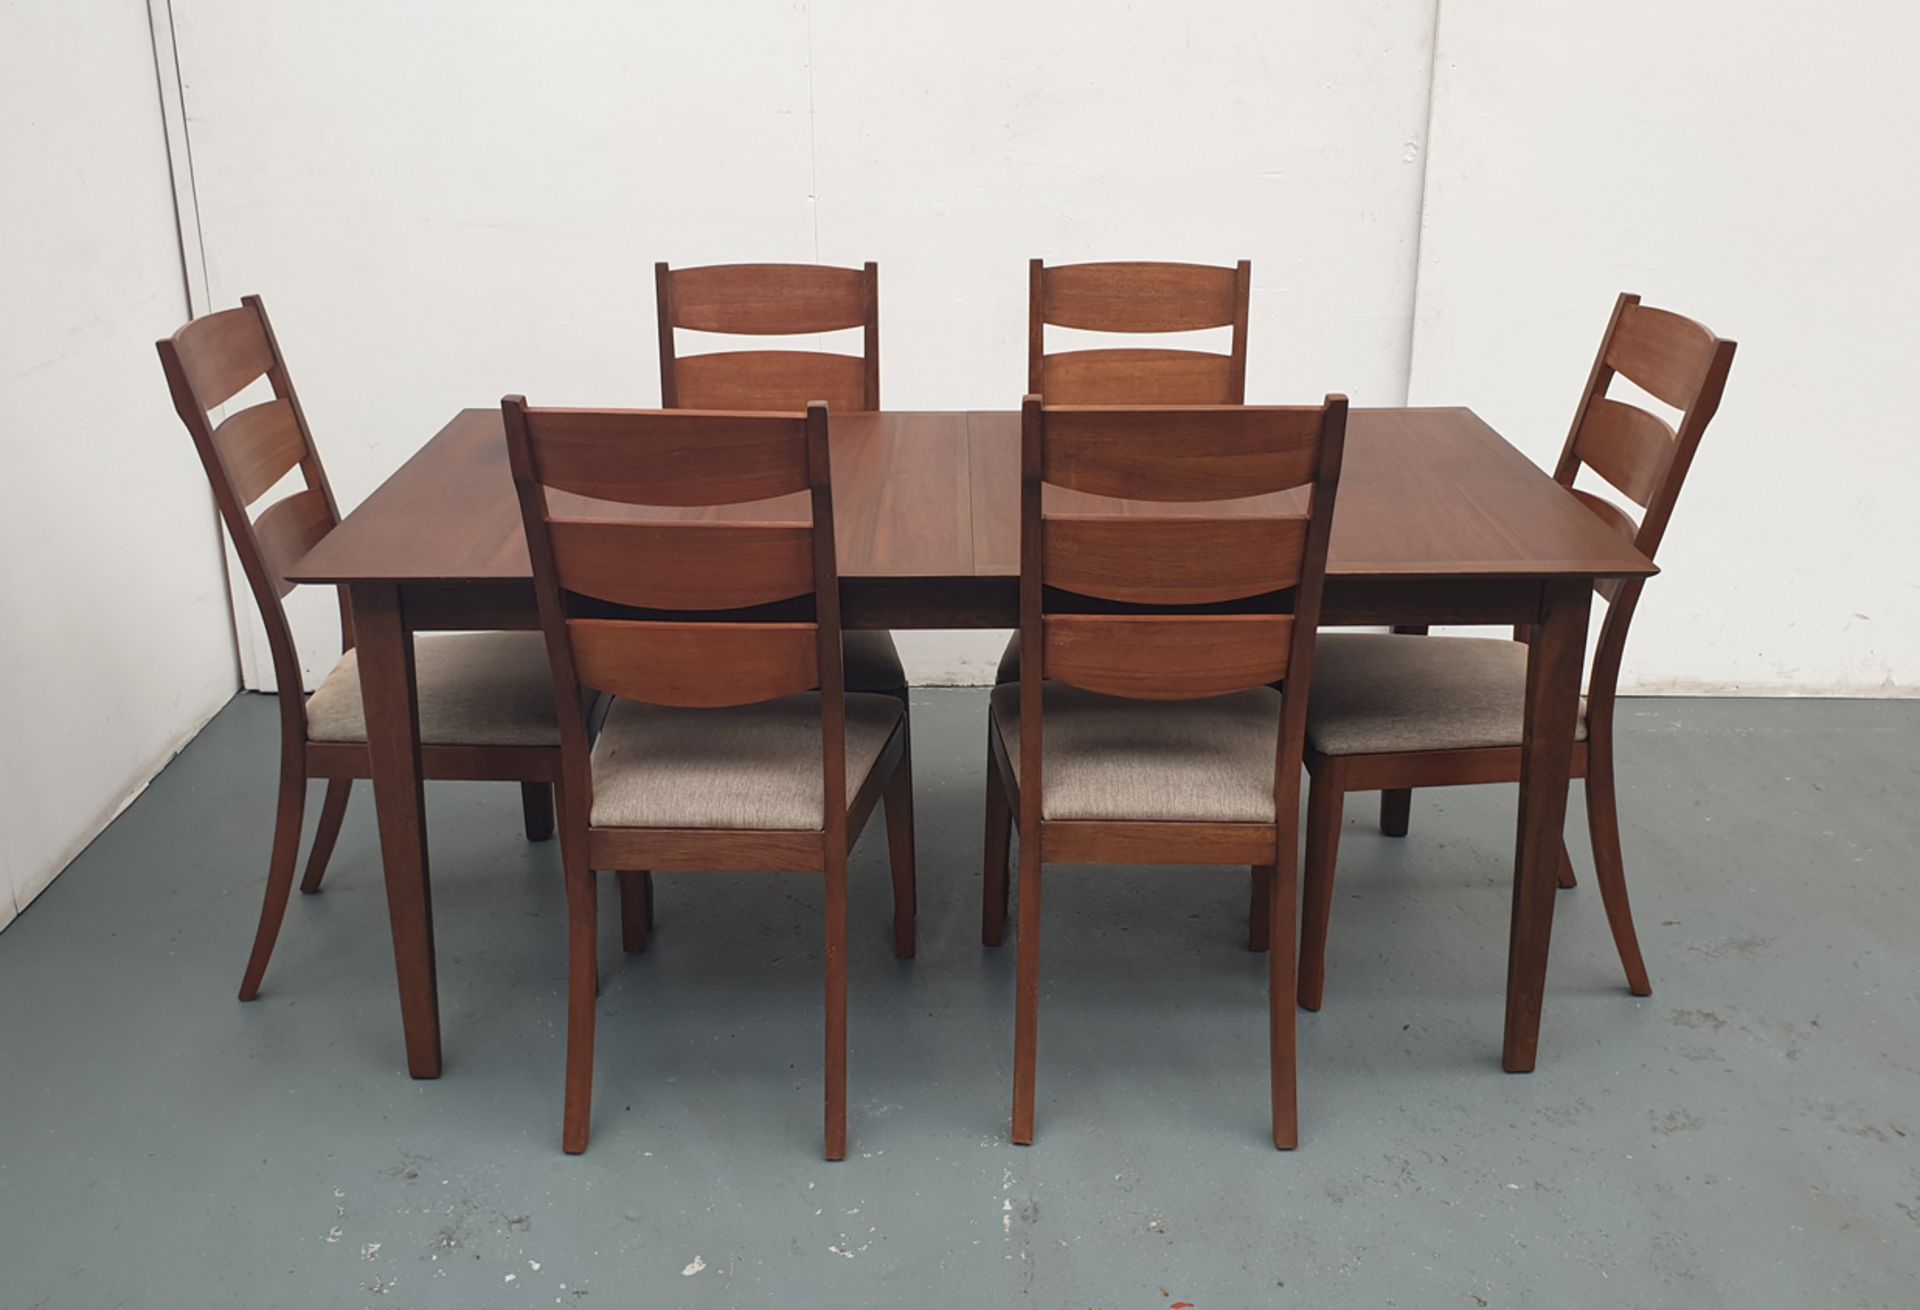 Solid Wood Dining Table & Chairs. Approx Dimensions 1700mm x 900mm x 780mm High.